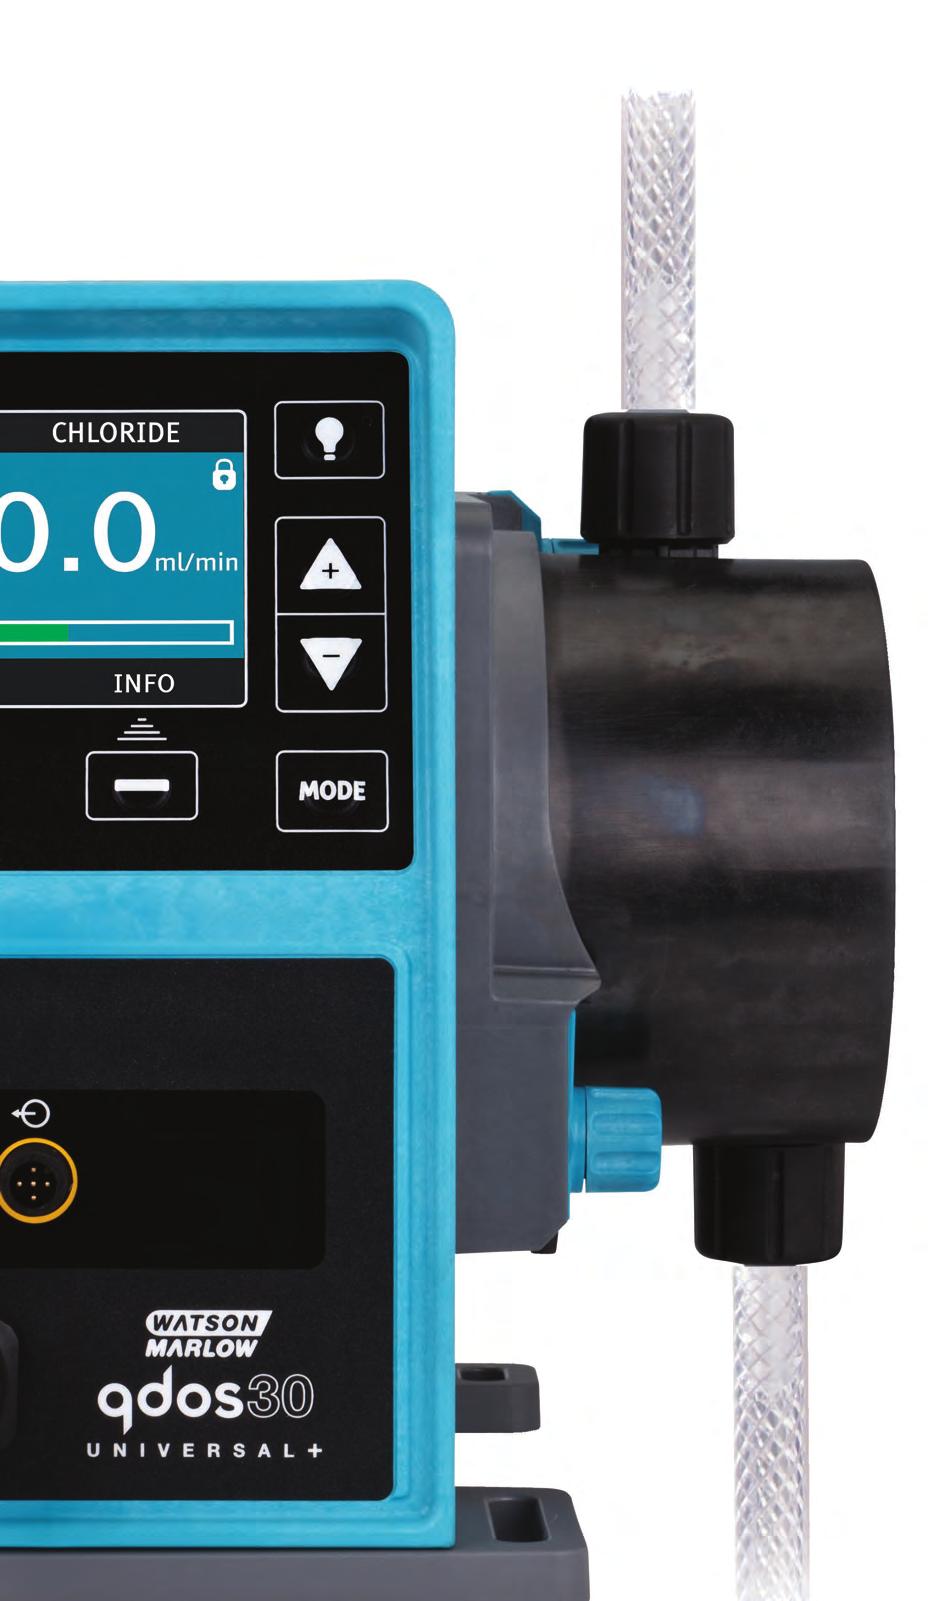 Cut chemical cost through higher accuracy metering Simple drop-in installation eliminates ancillary equipment Reduced maintenance with single, no-tools, component